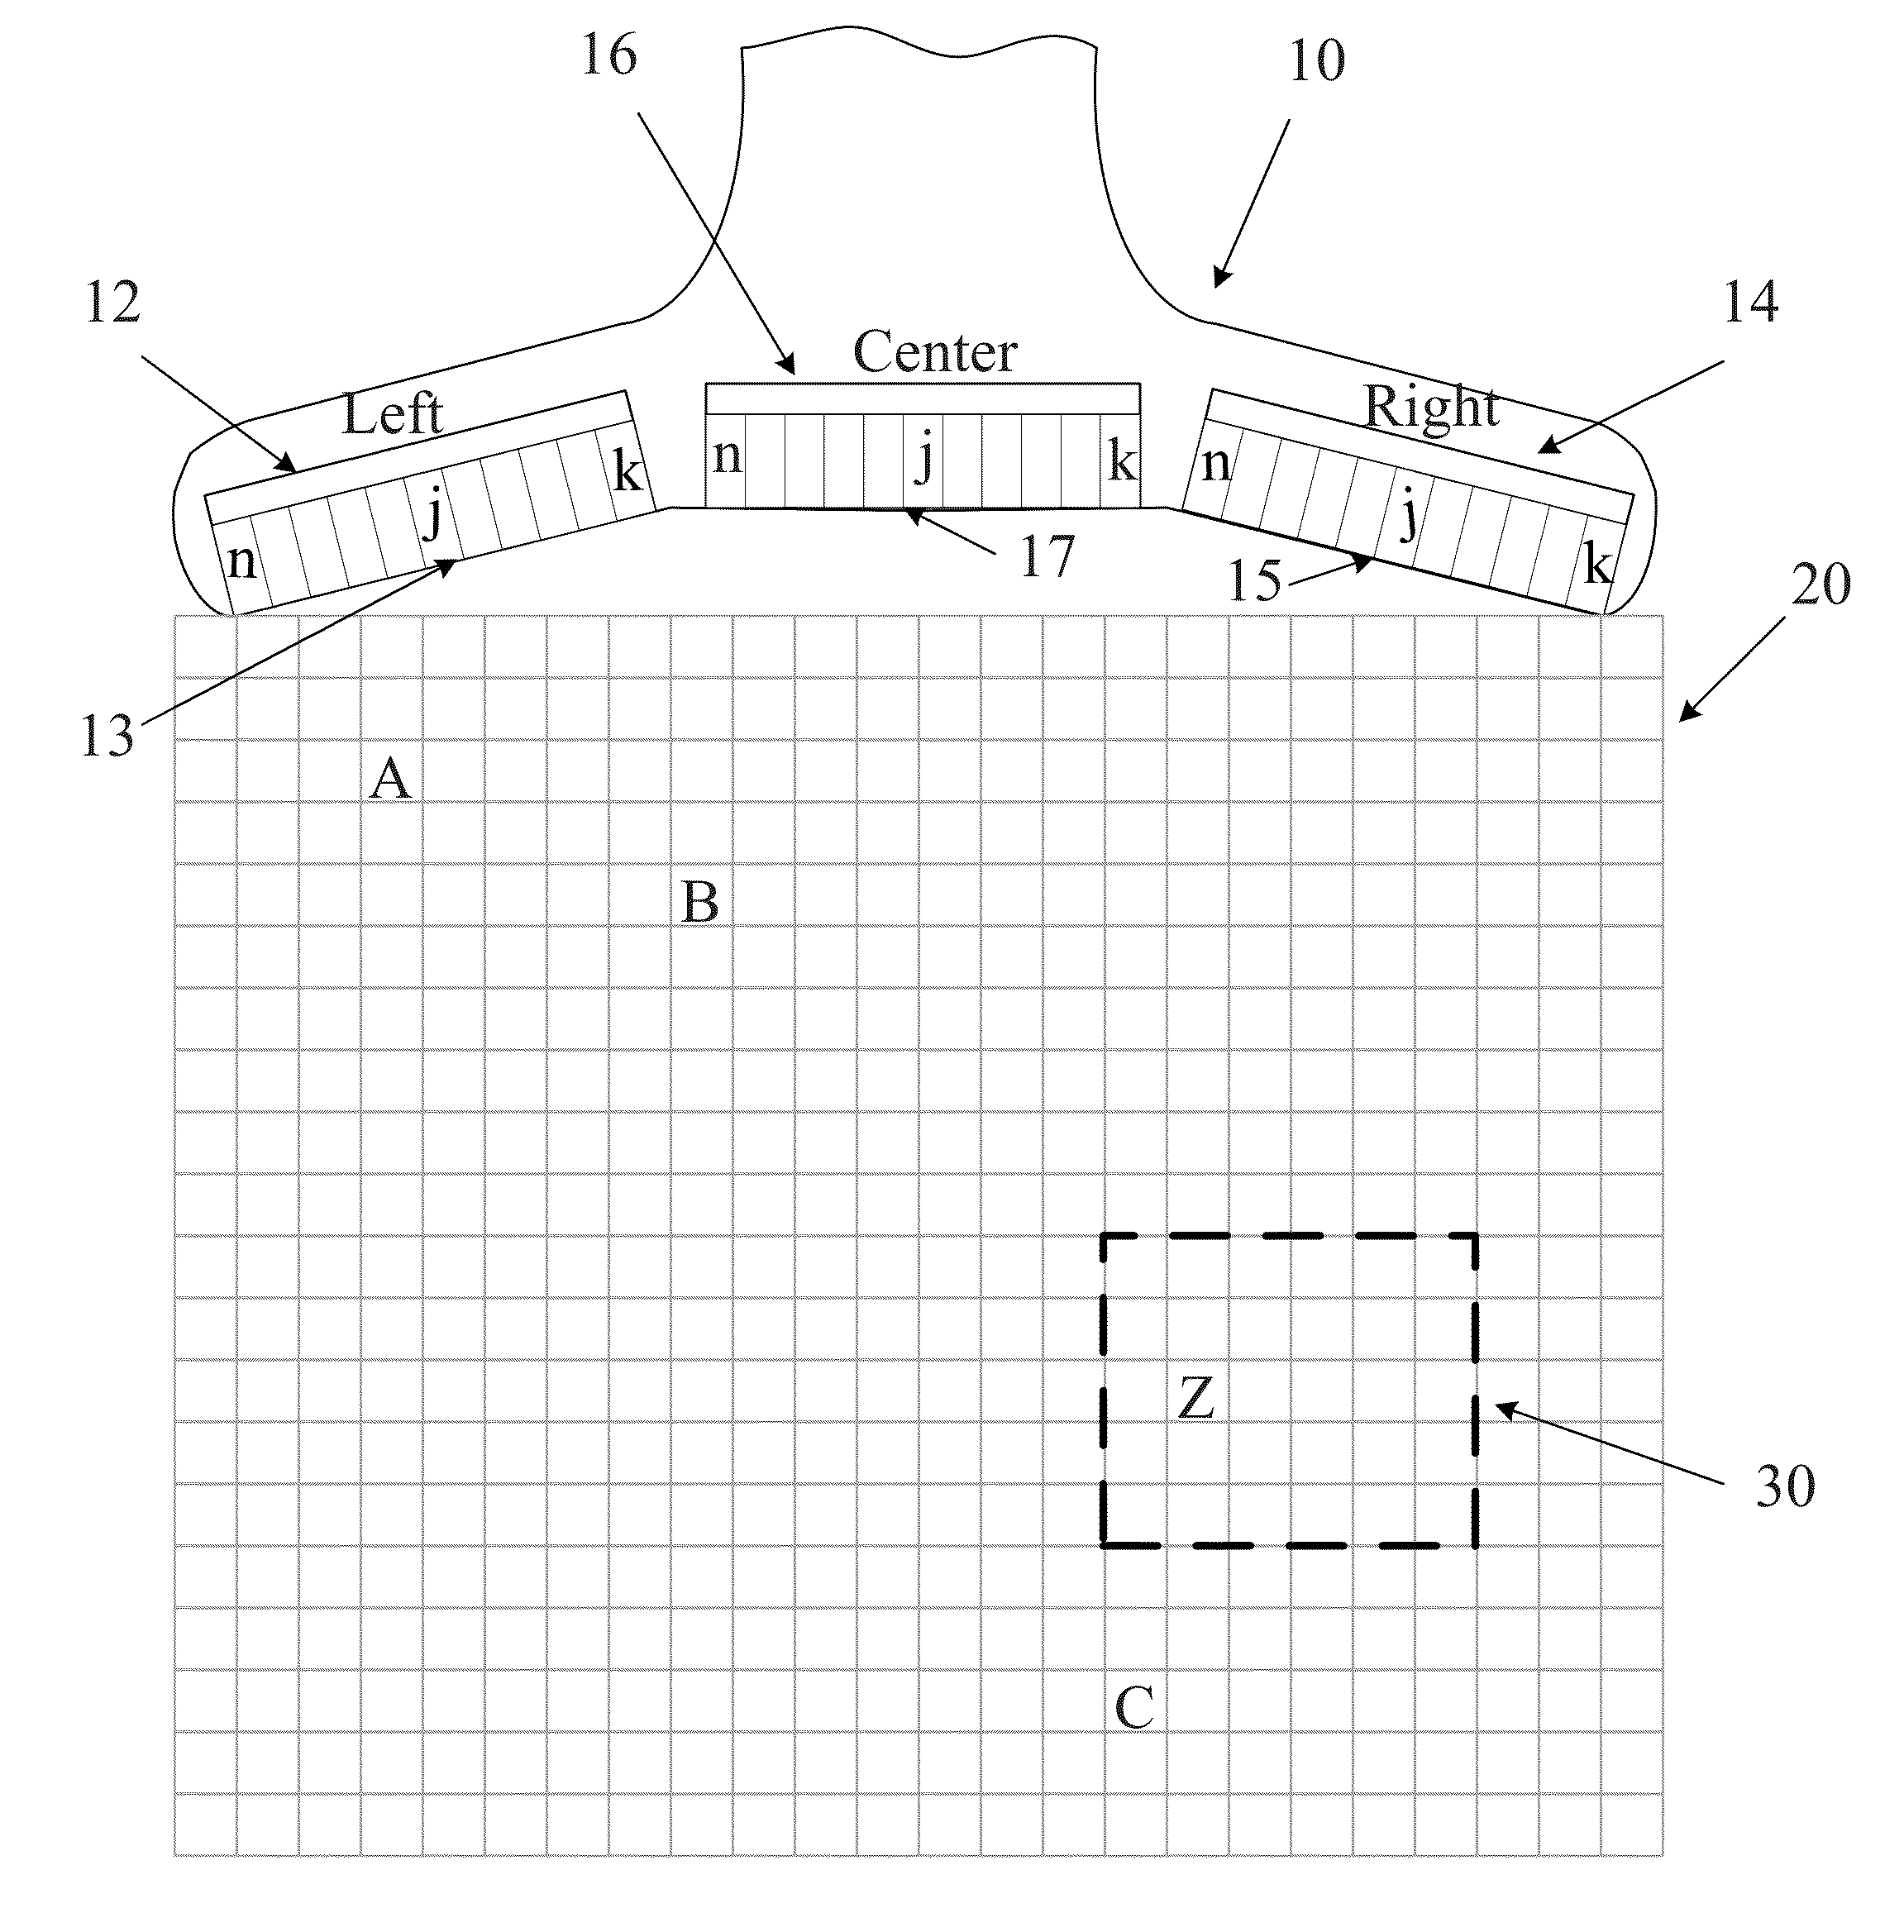 Ultrasound Imaging System Memory Architecture